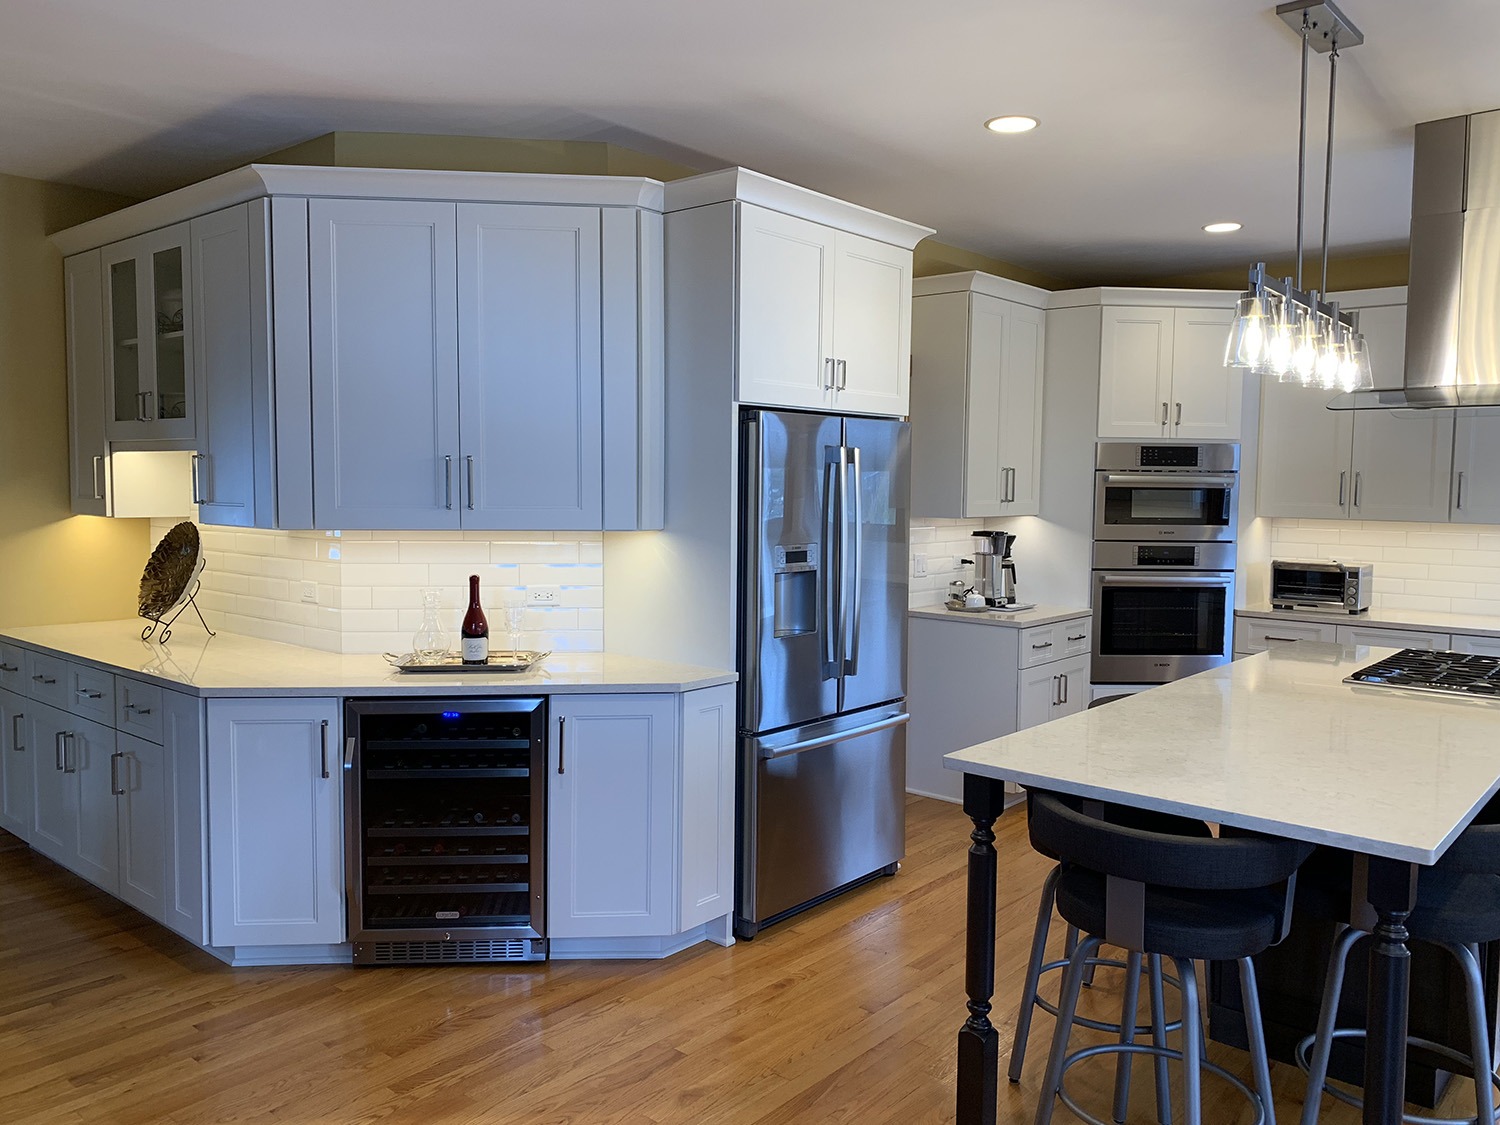 the kitchen master remodel white cabinetry wine cooler island with pendant lighting stainless steel